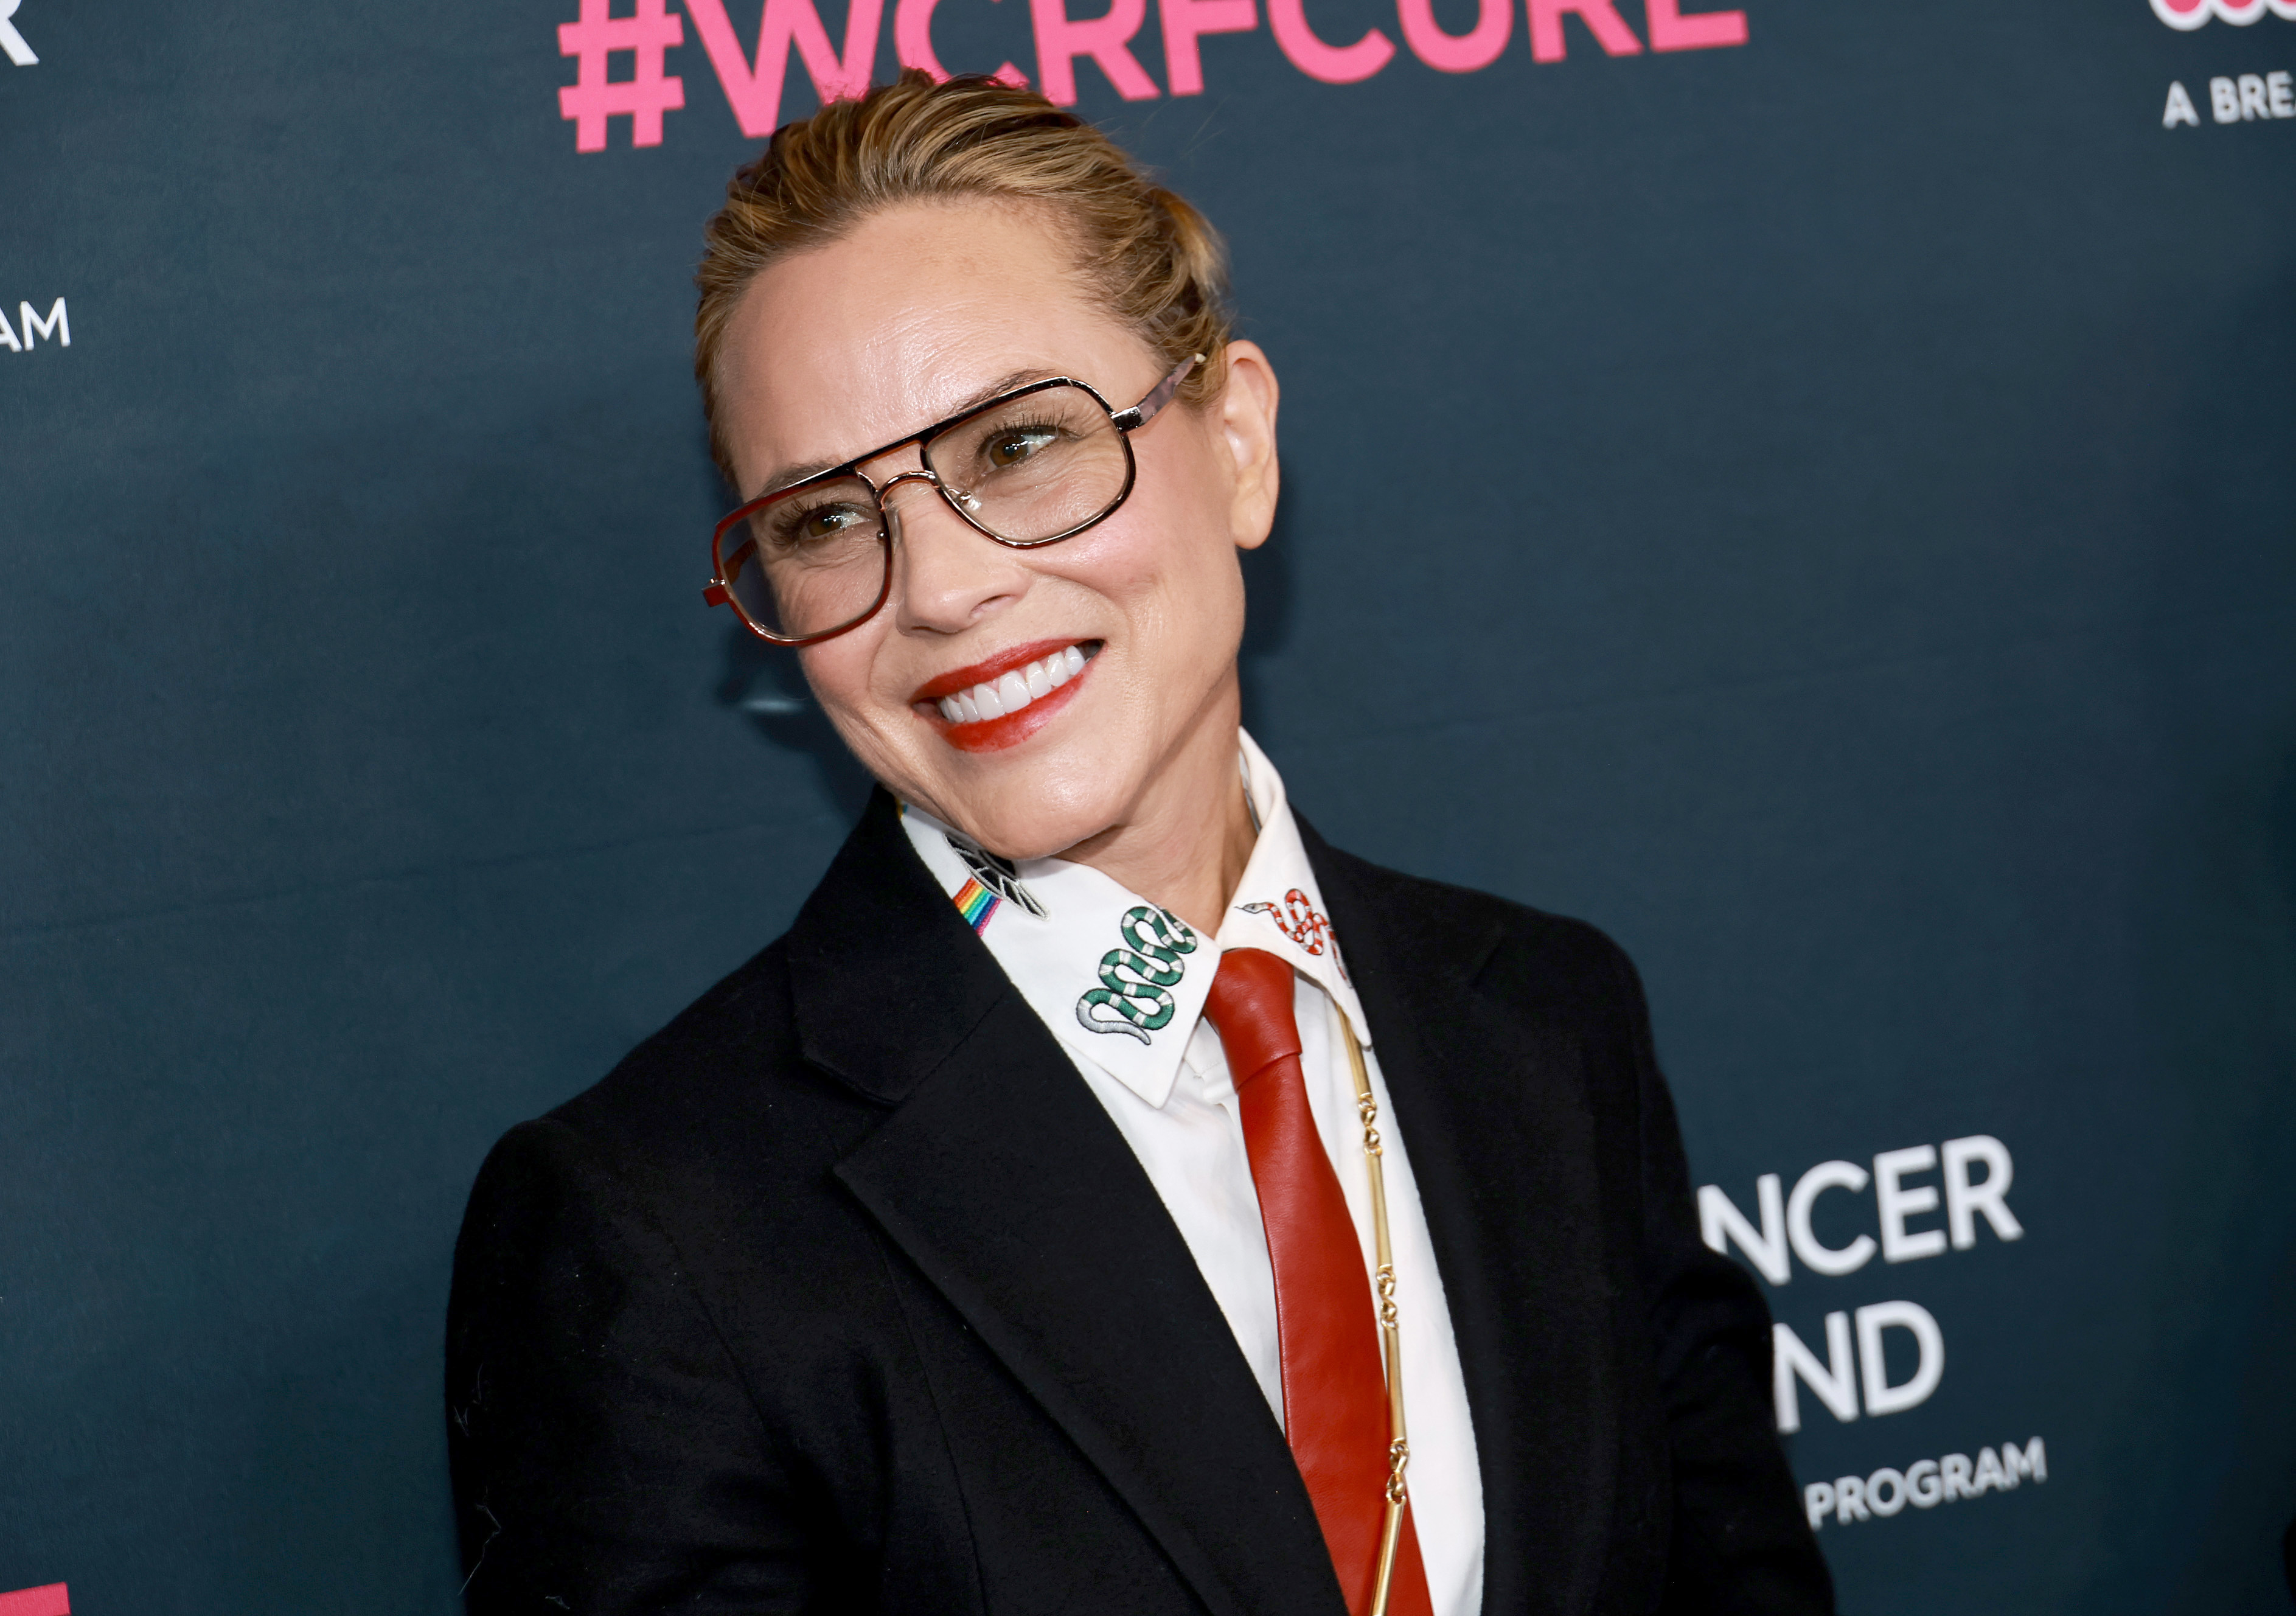 Maria smiling at a media event wearing a suit and tie